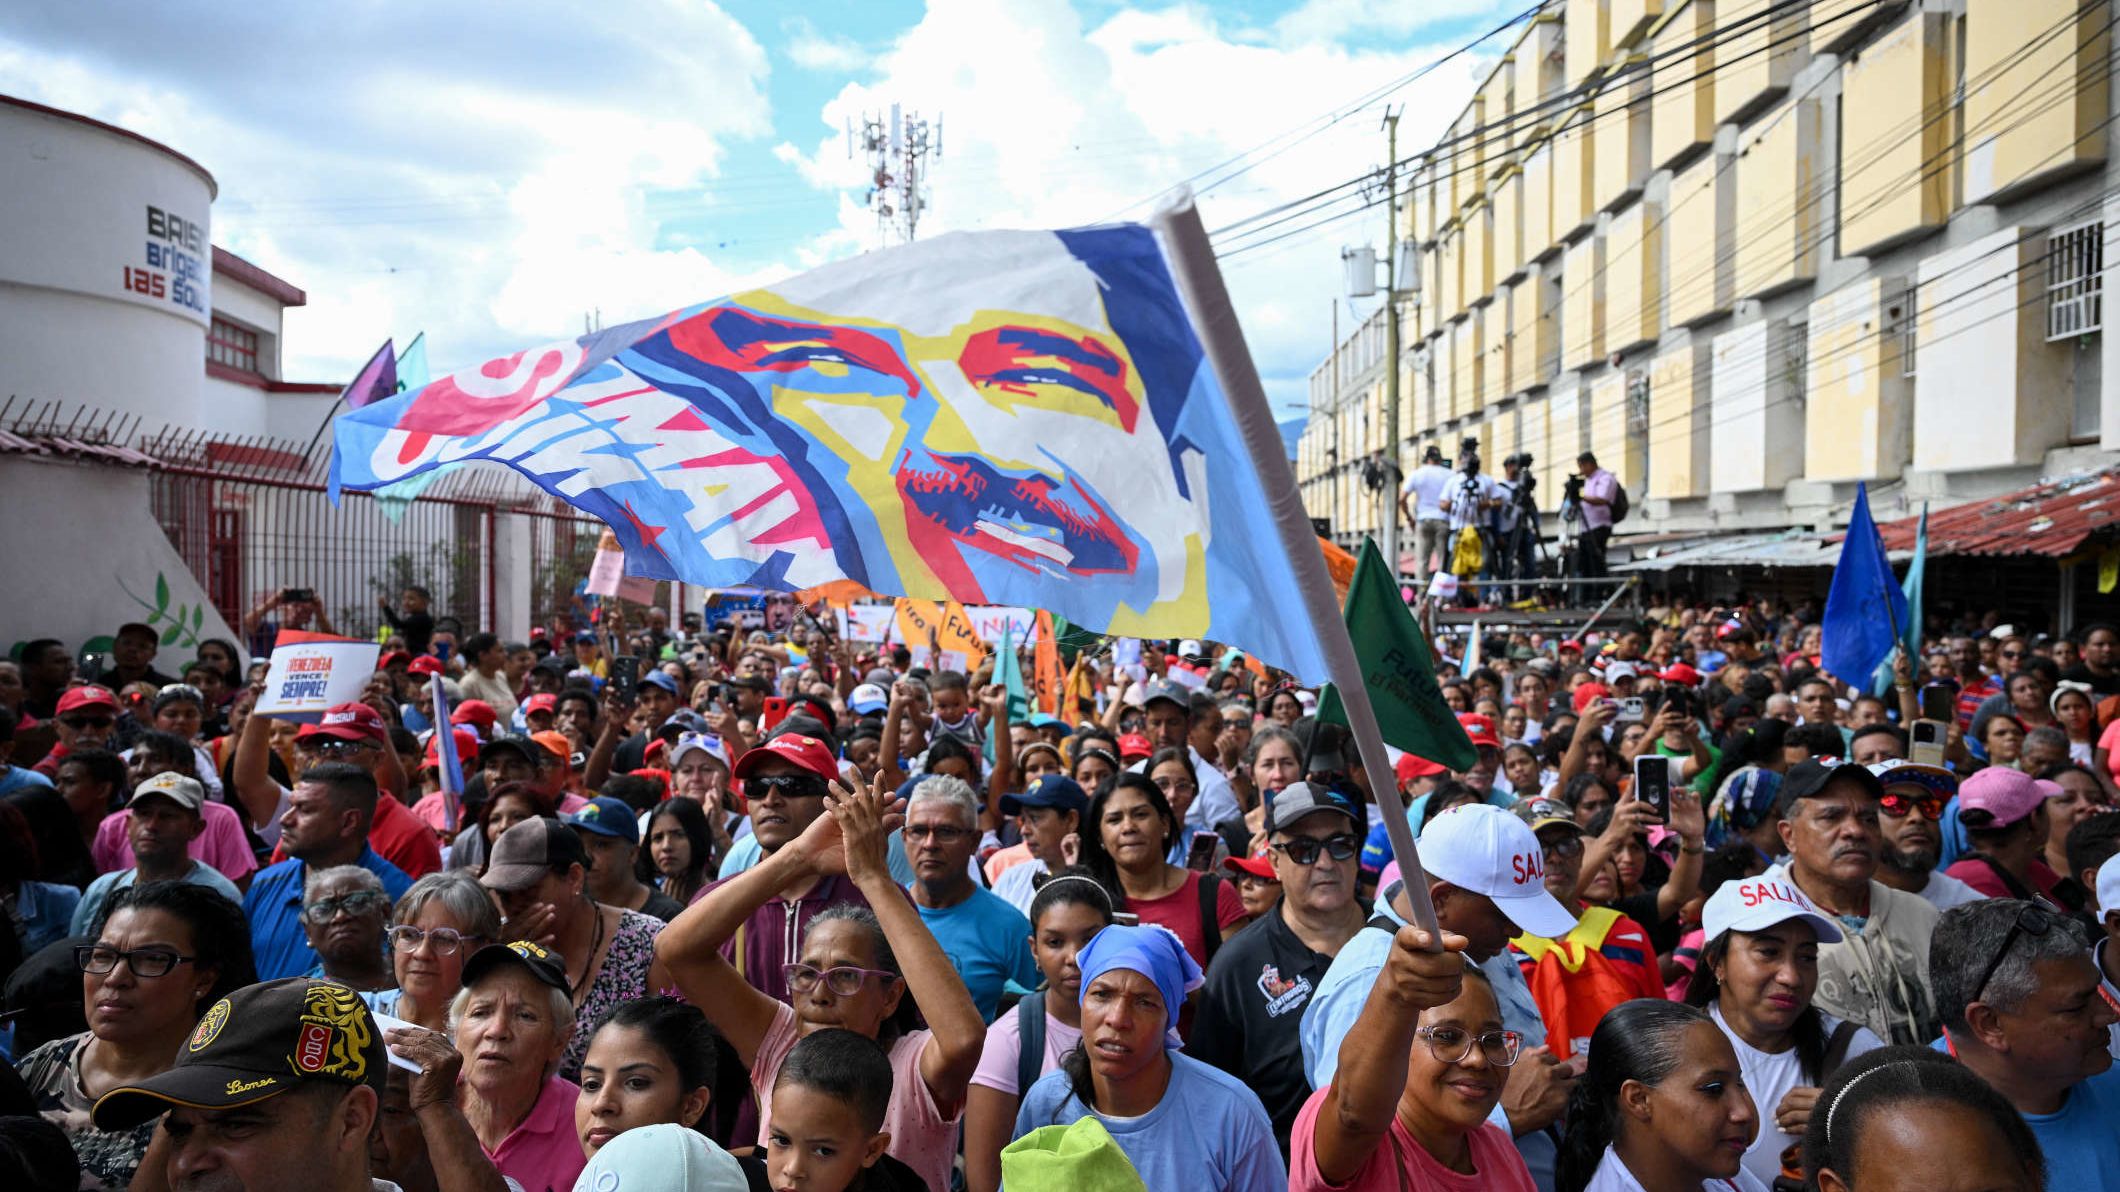 News from the campaign of Nicolás Maduro, Edmundo González and others